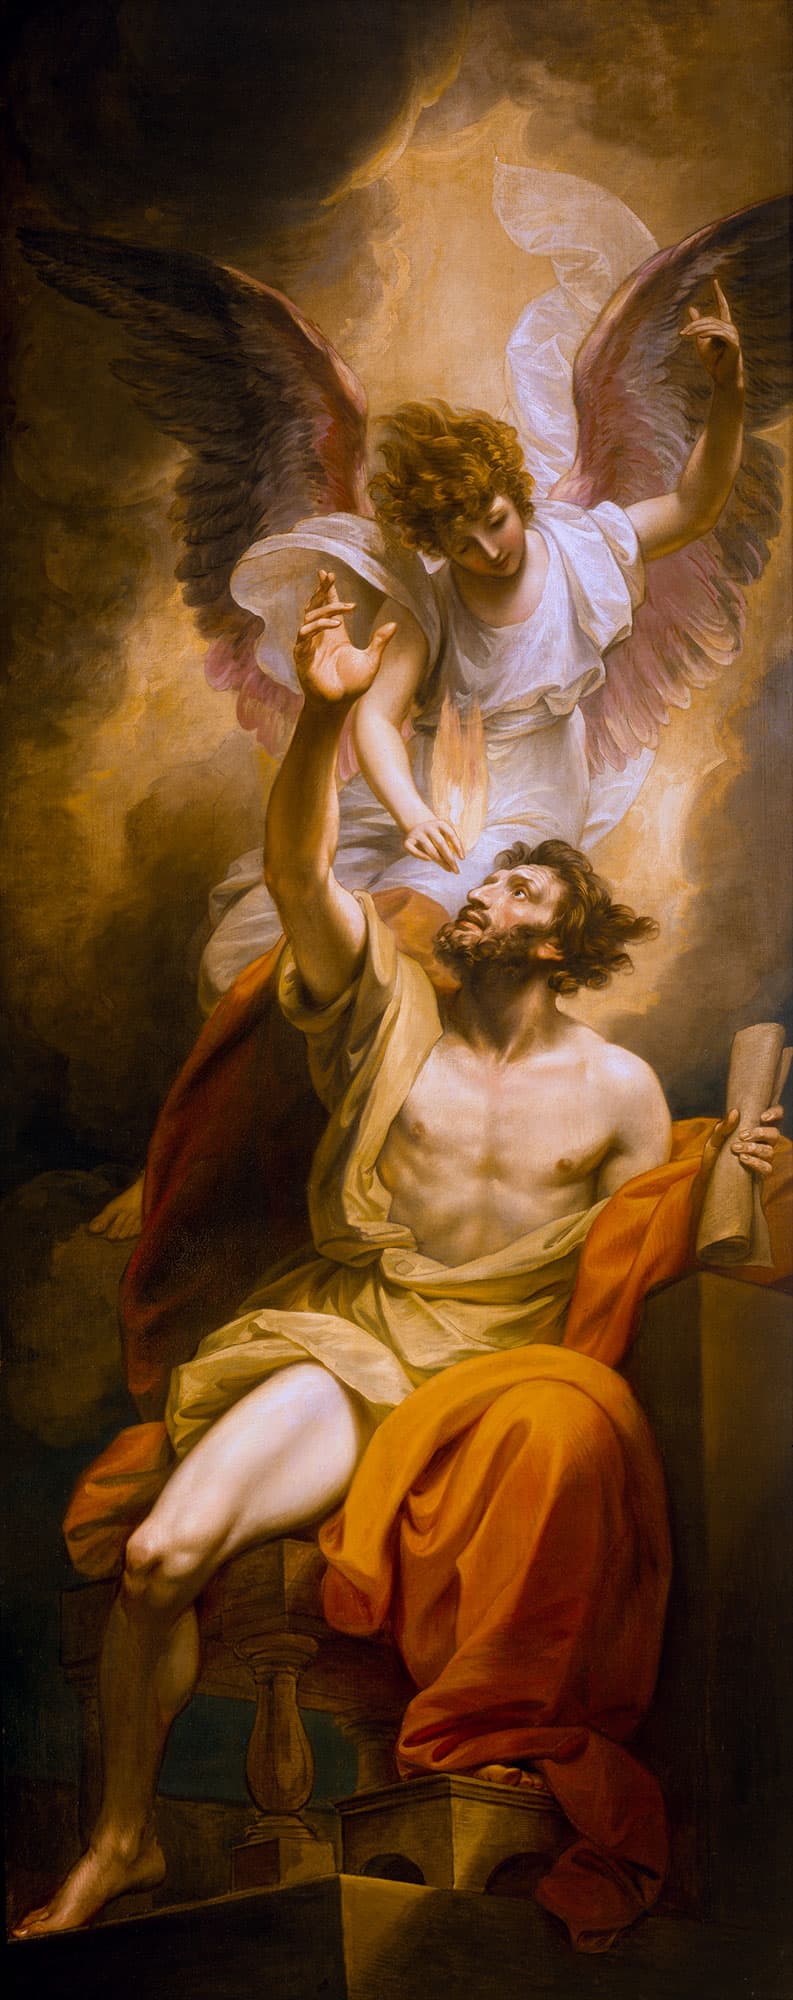 Isaiah with angel by Benjamin West